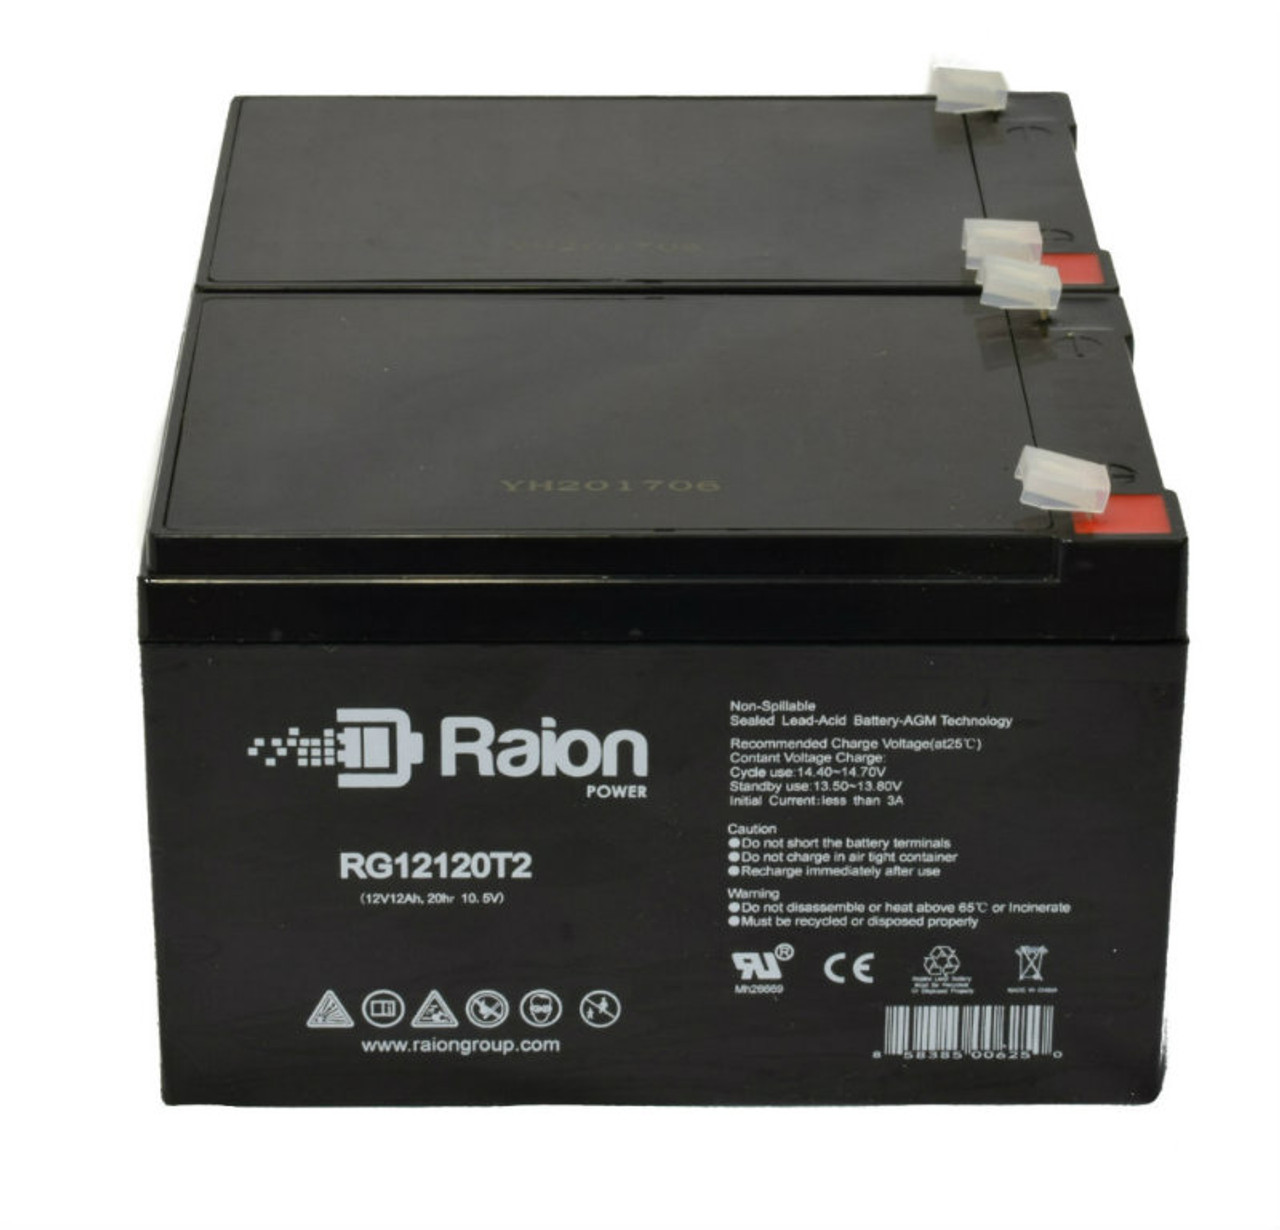 Raion Power 12V 12Ah Non-Spillable Compatible Replacement Battery for Rascal 370 Fold & G (2) - (2 Pack)